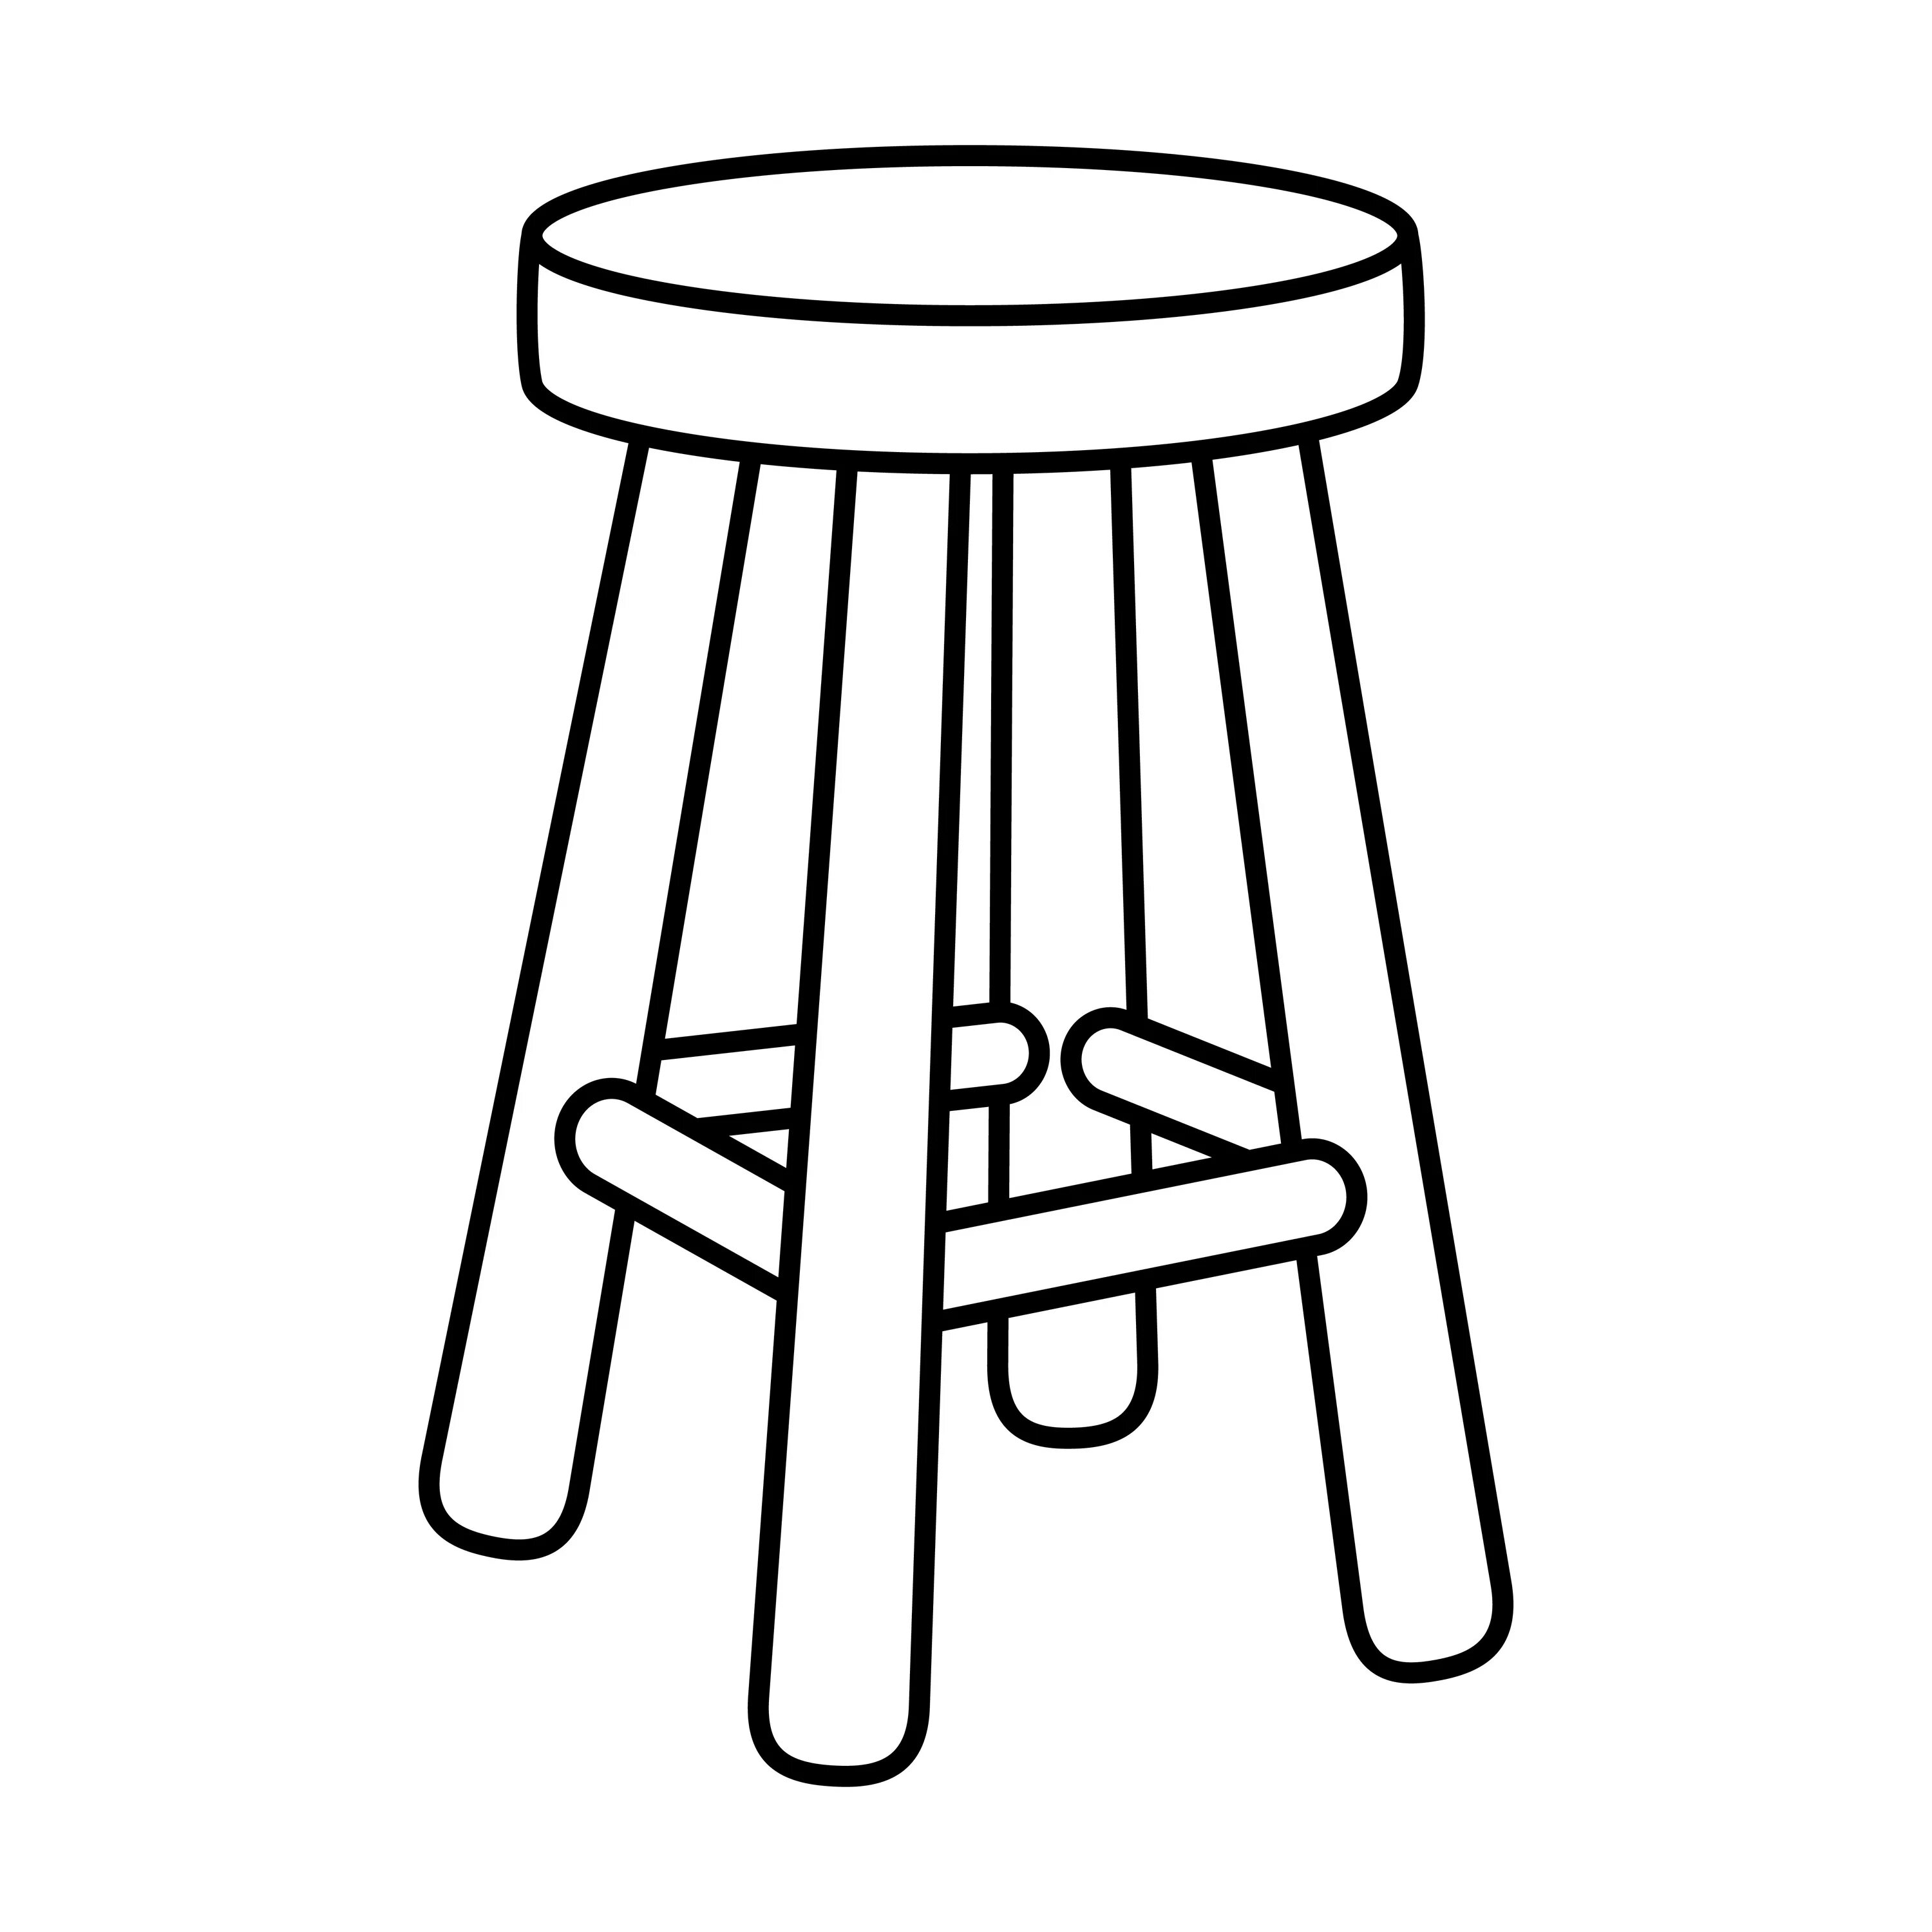 Sharp stool coloring page